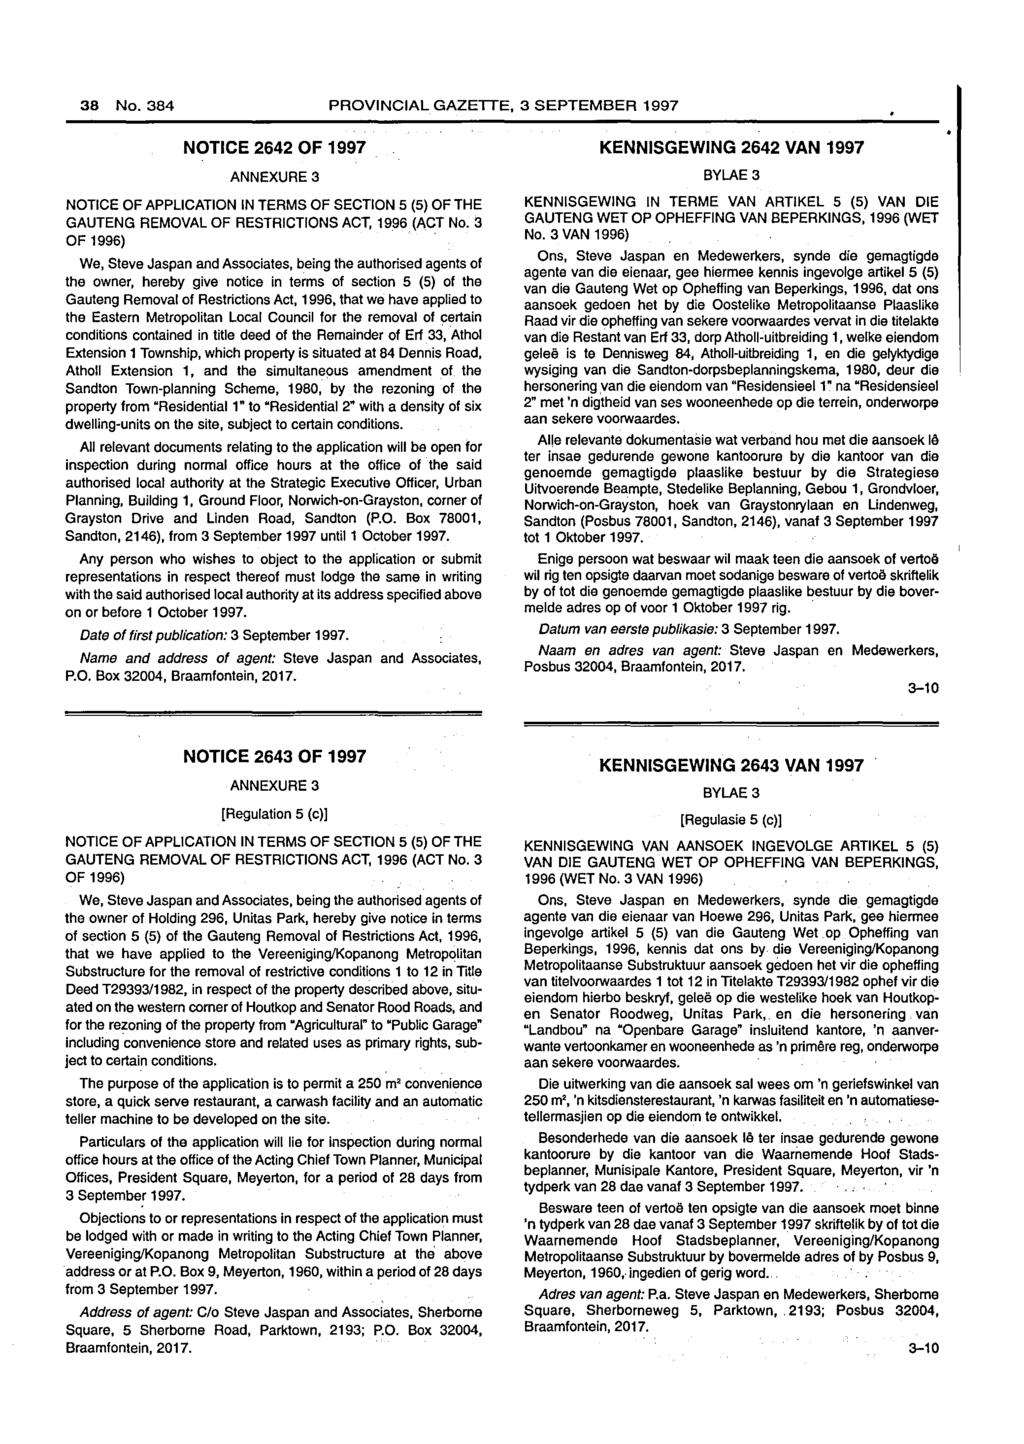 38 No. PROVINCIAL GAZETTE, 3 SEPTEMBER 1997 NOTICE 2642 OF 1997 ANNEXURE 3 NOTICE OF APPLICATION IN TERMS OF SECTION 5 (5) OF THE GAUTENG REMOVAL OF RESTRICTIONS ACT, 19.96 (ACT No. 3 OF 1996).